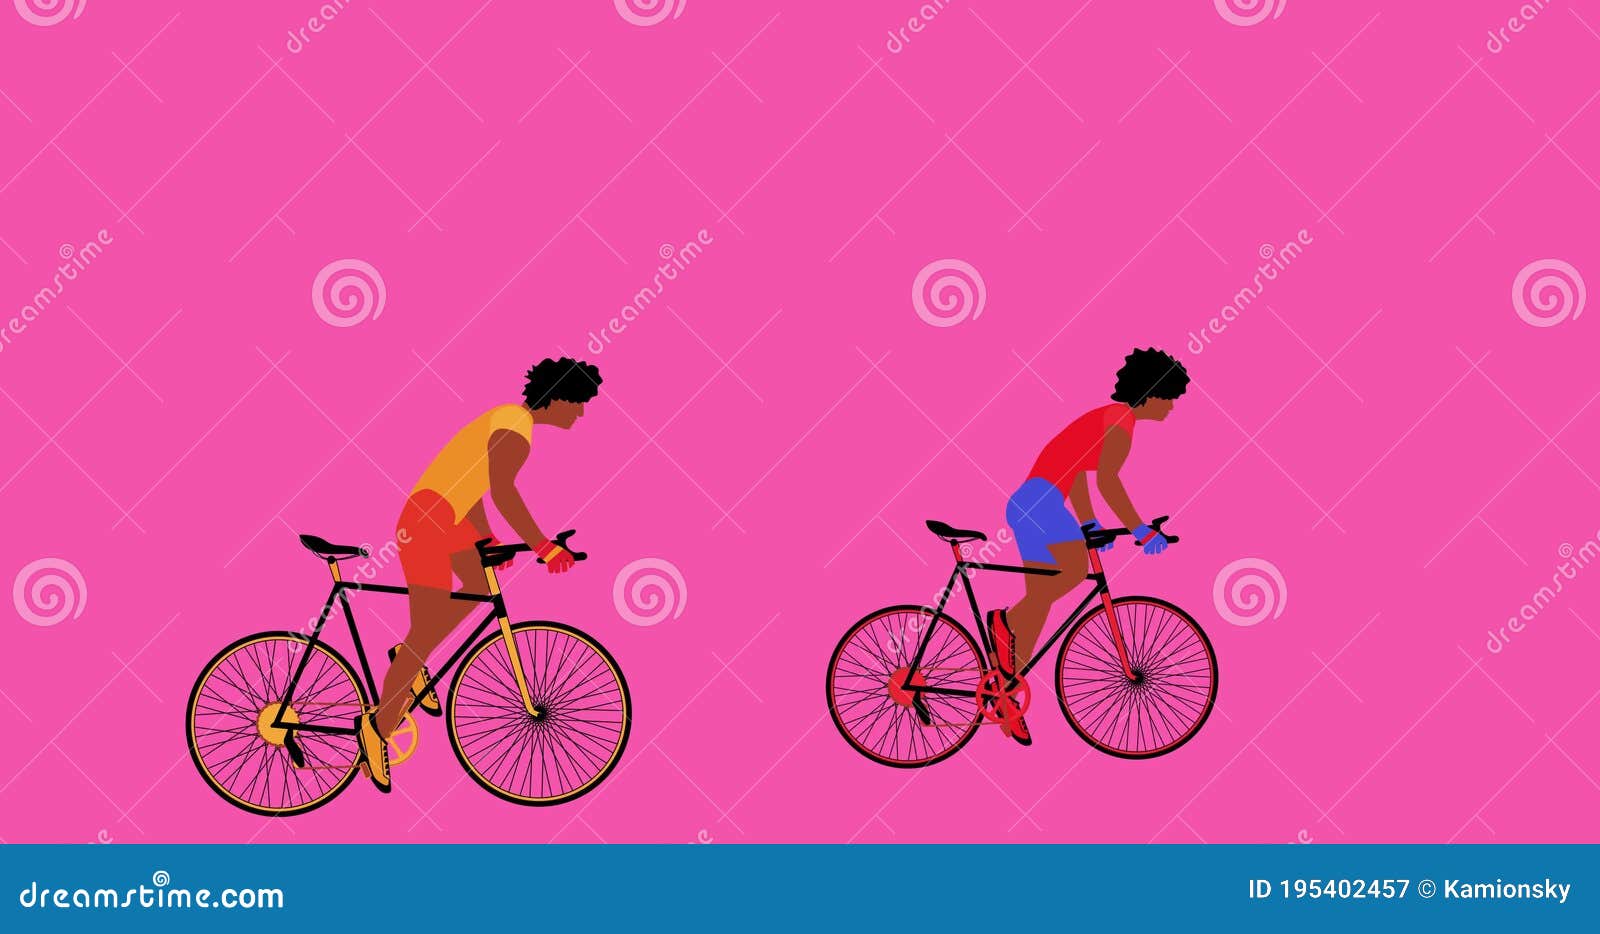 Bicycles Background Stock Illustrations 3 144 Bicycles Background Stock Illustrations Vectors Clipart Dreamstime